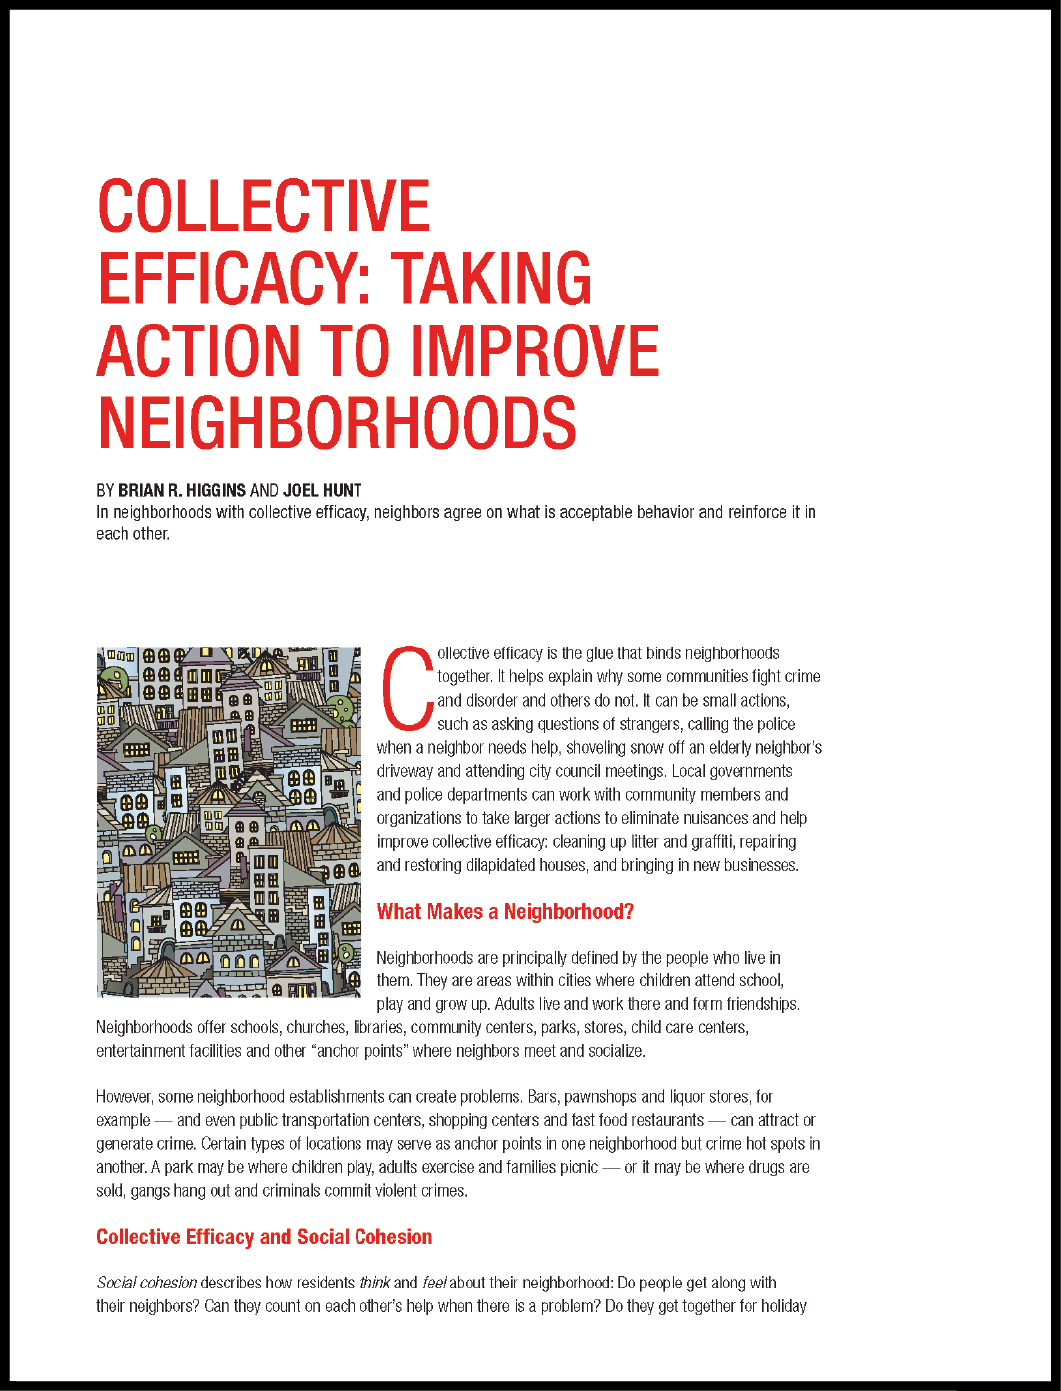 First page of document "Collective Efficacy: Taking Action to Improve Neighborhoods"